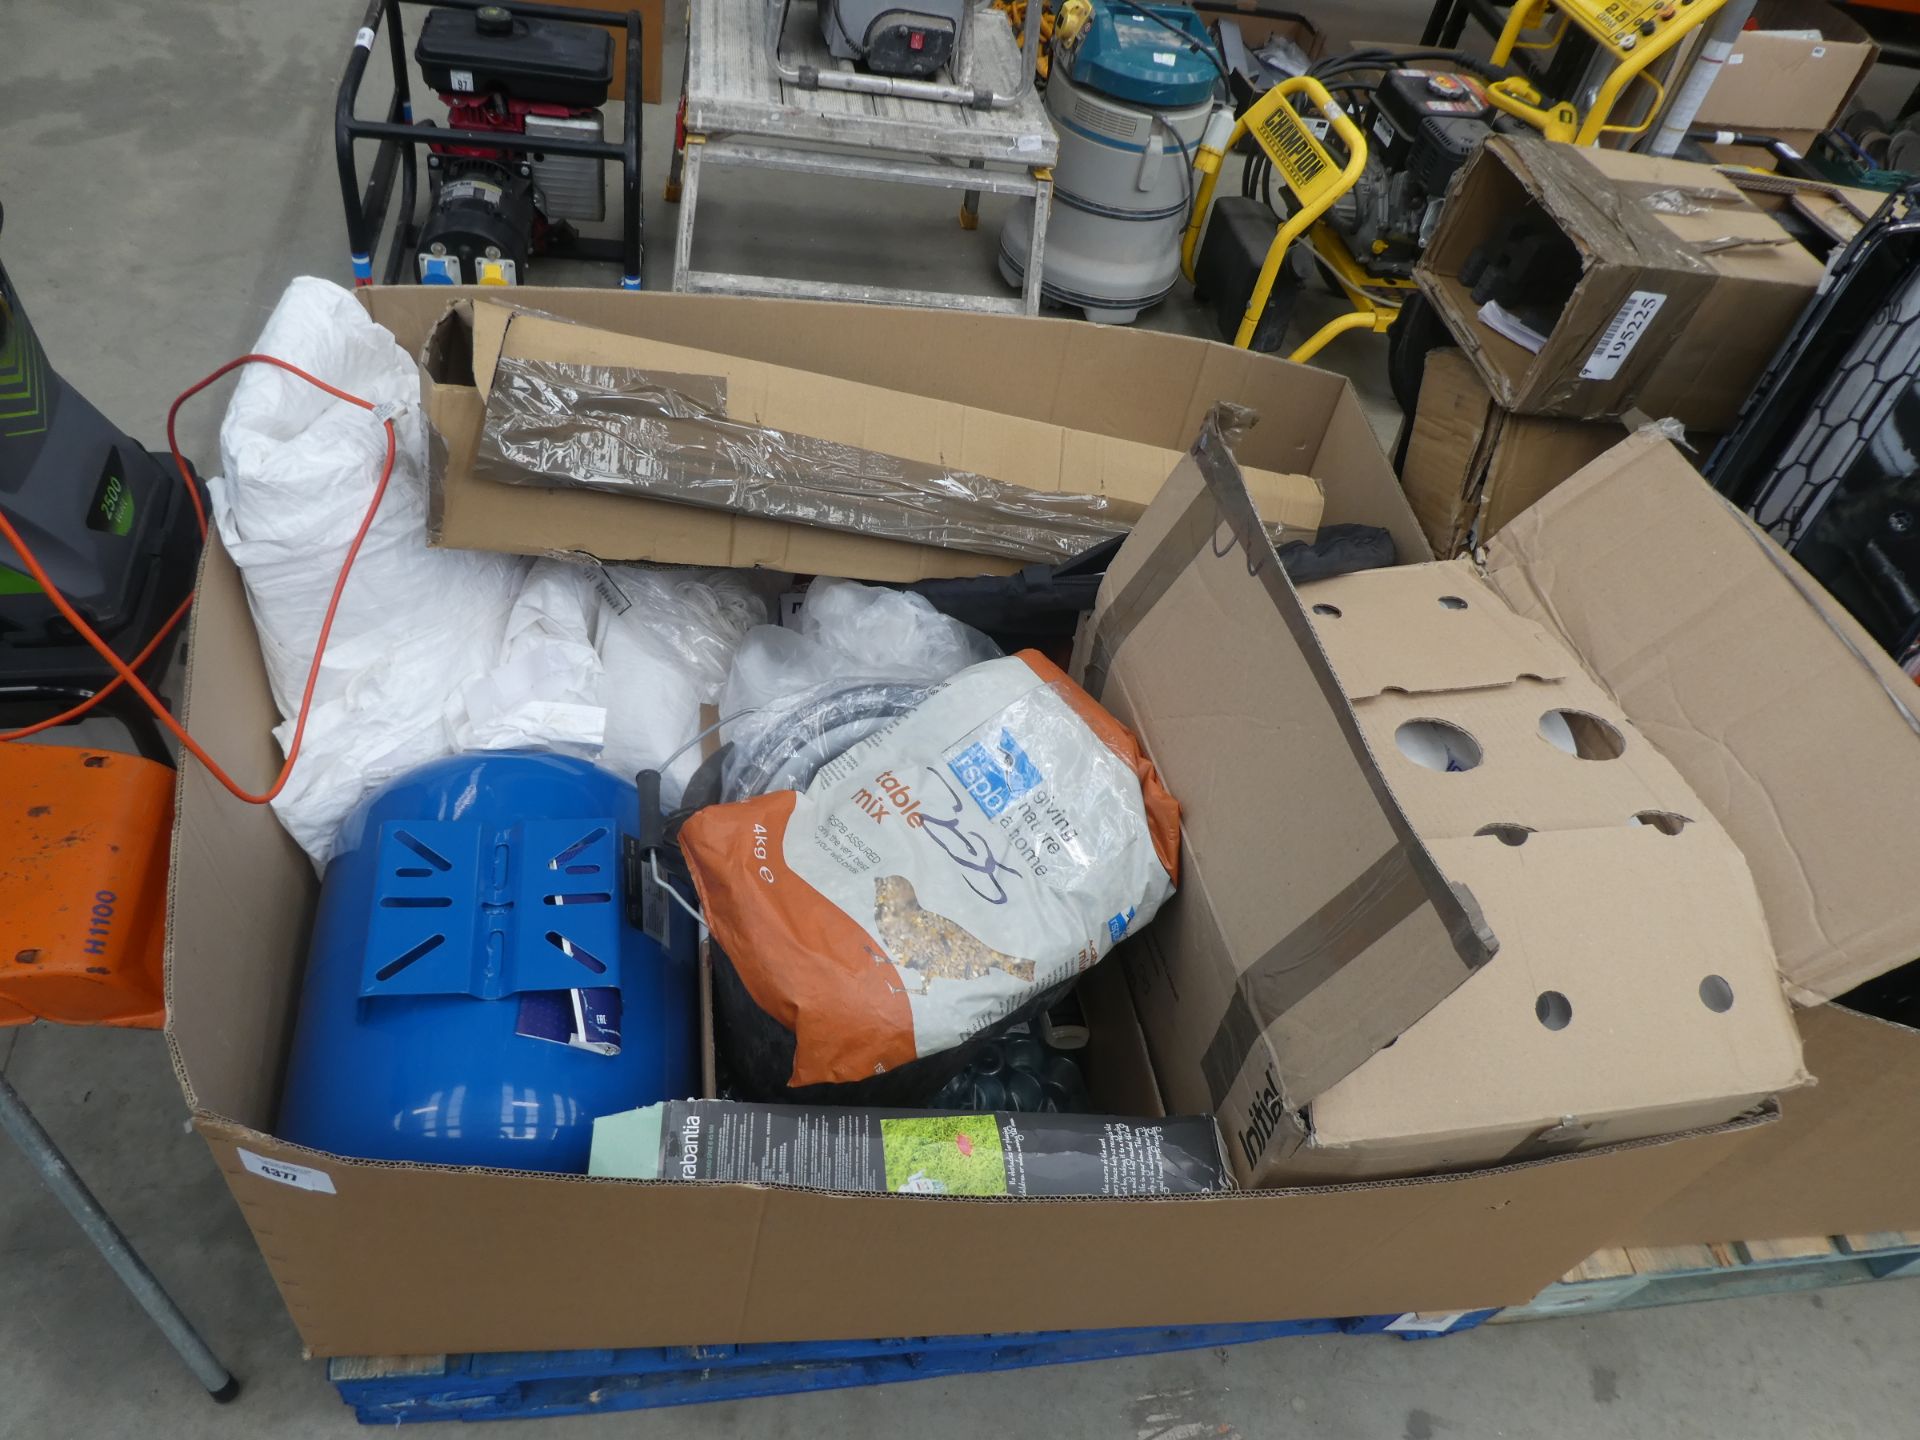 Pallet box containing bird feed, flatpack unit, seat cushions, buckets, metal couplings, toilet roll